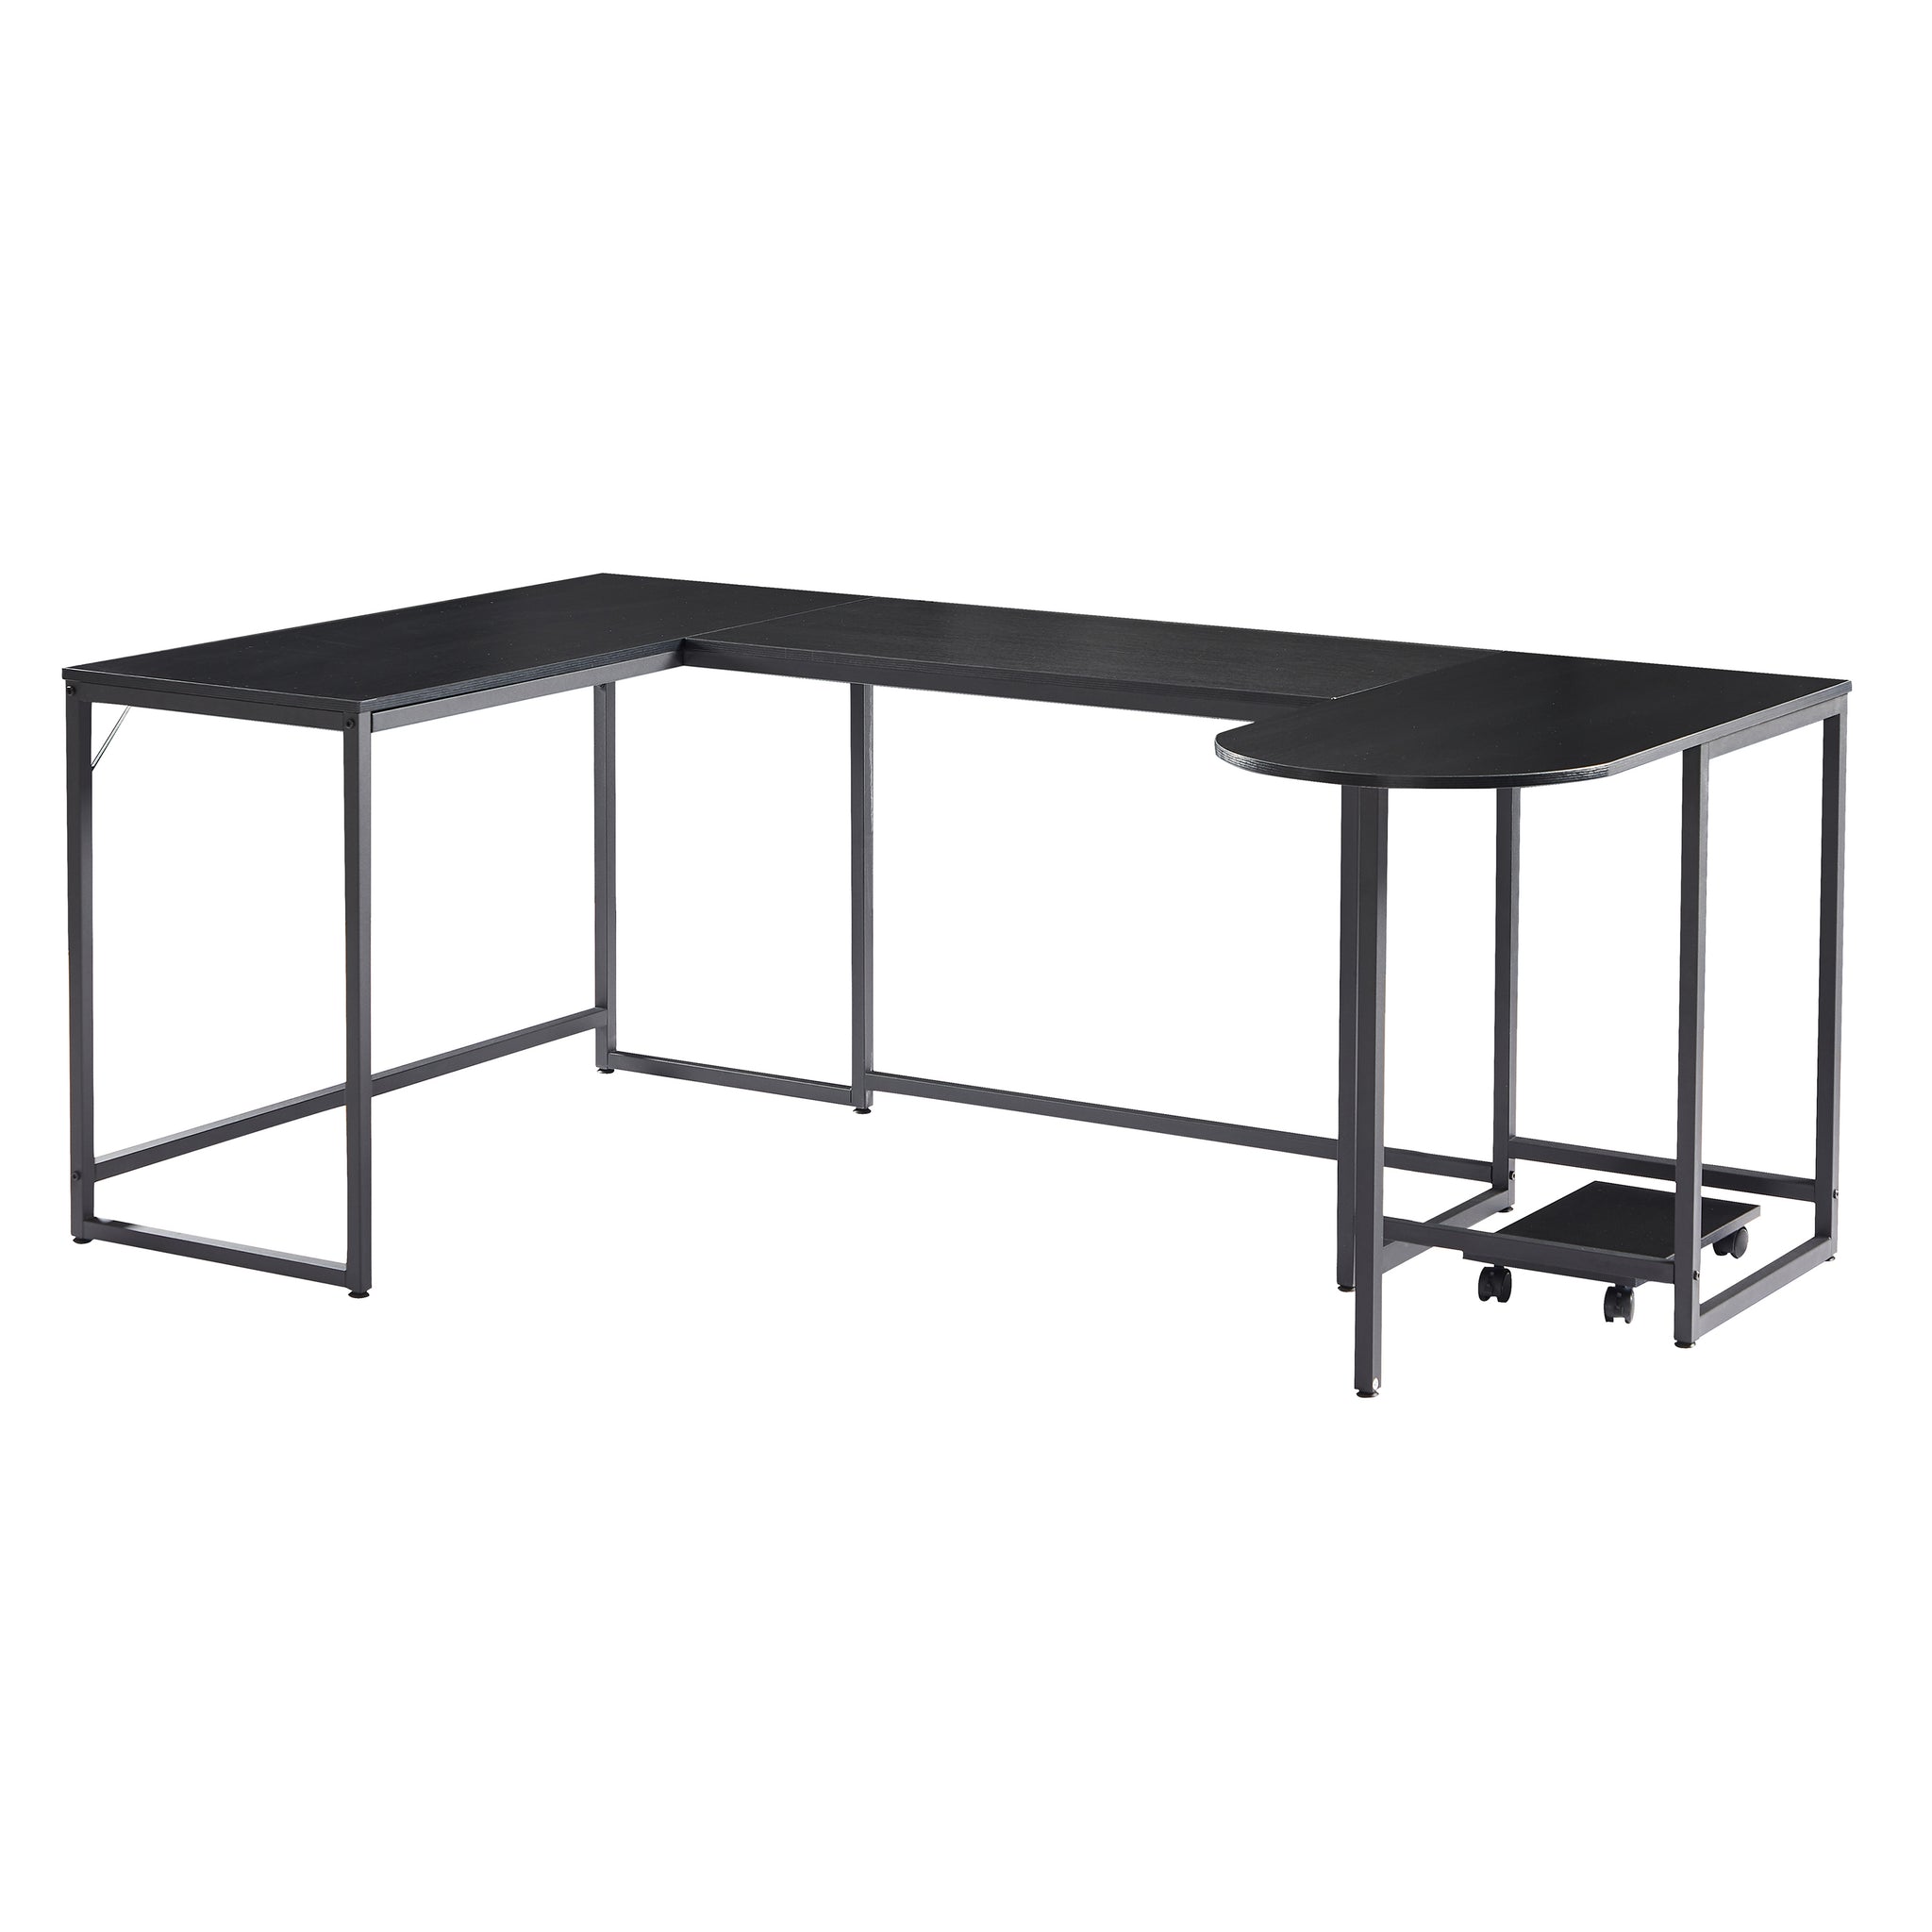 RaDEWAY U-shaped Computer Desk, Industrial Corner Writing Desk with CPU Stand, Gaming Table Workstation Desk for Home Office